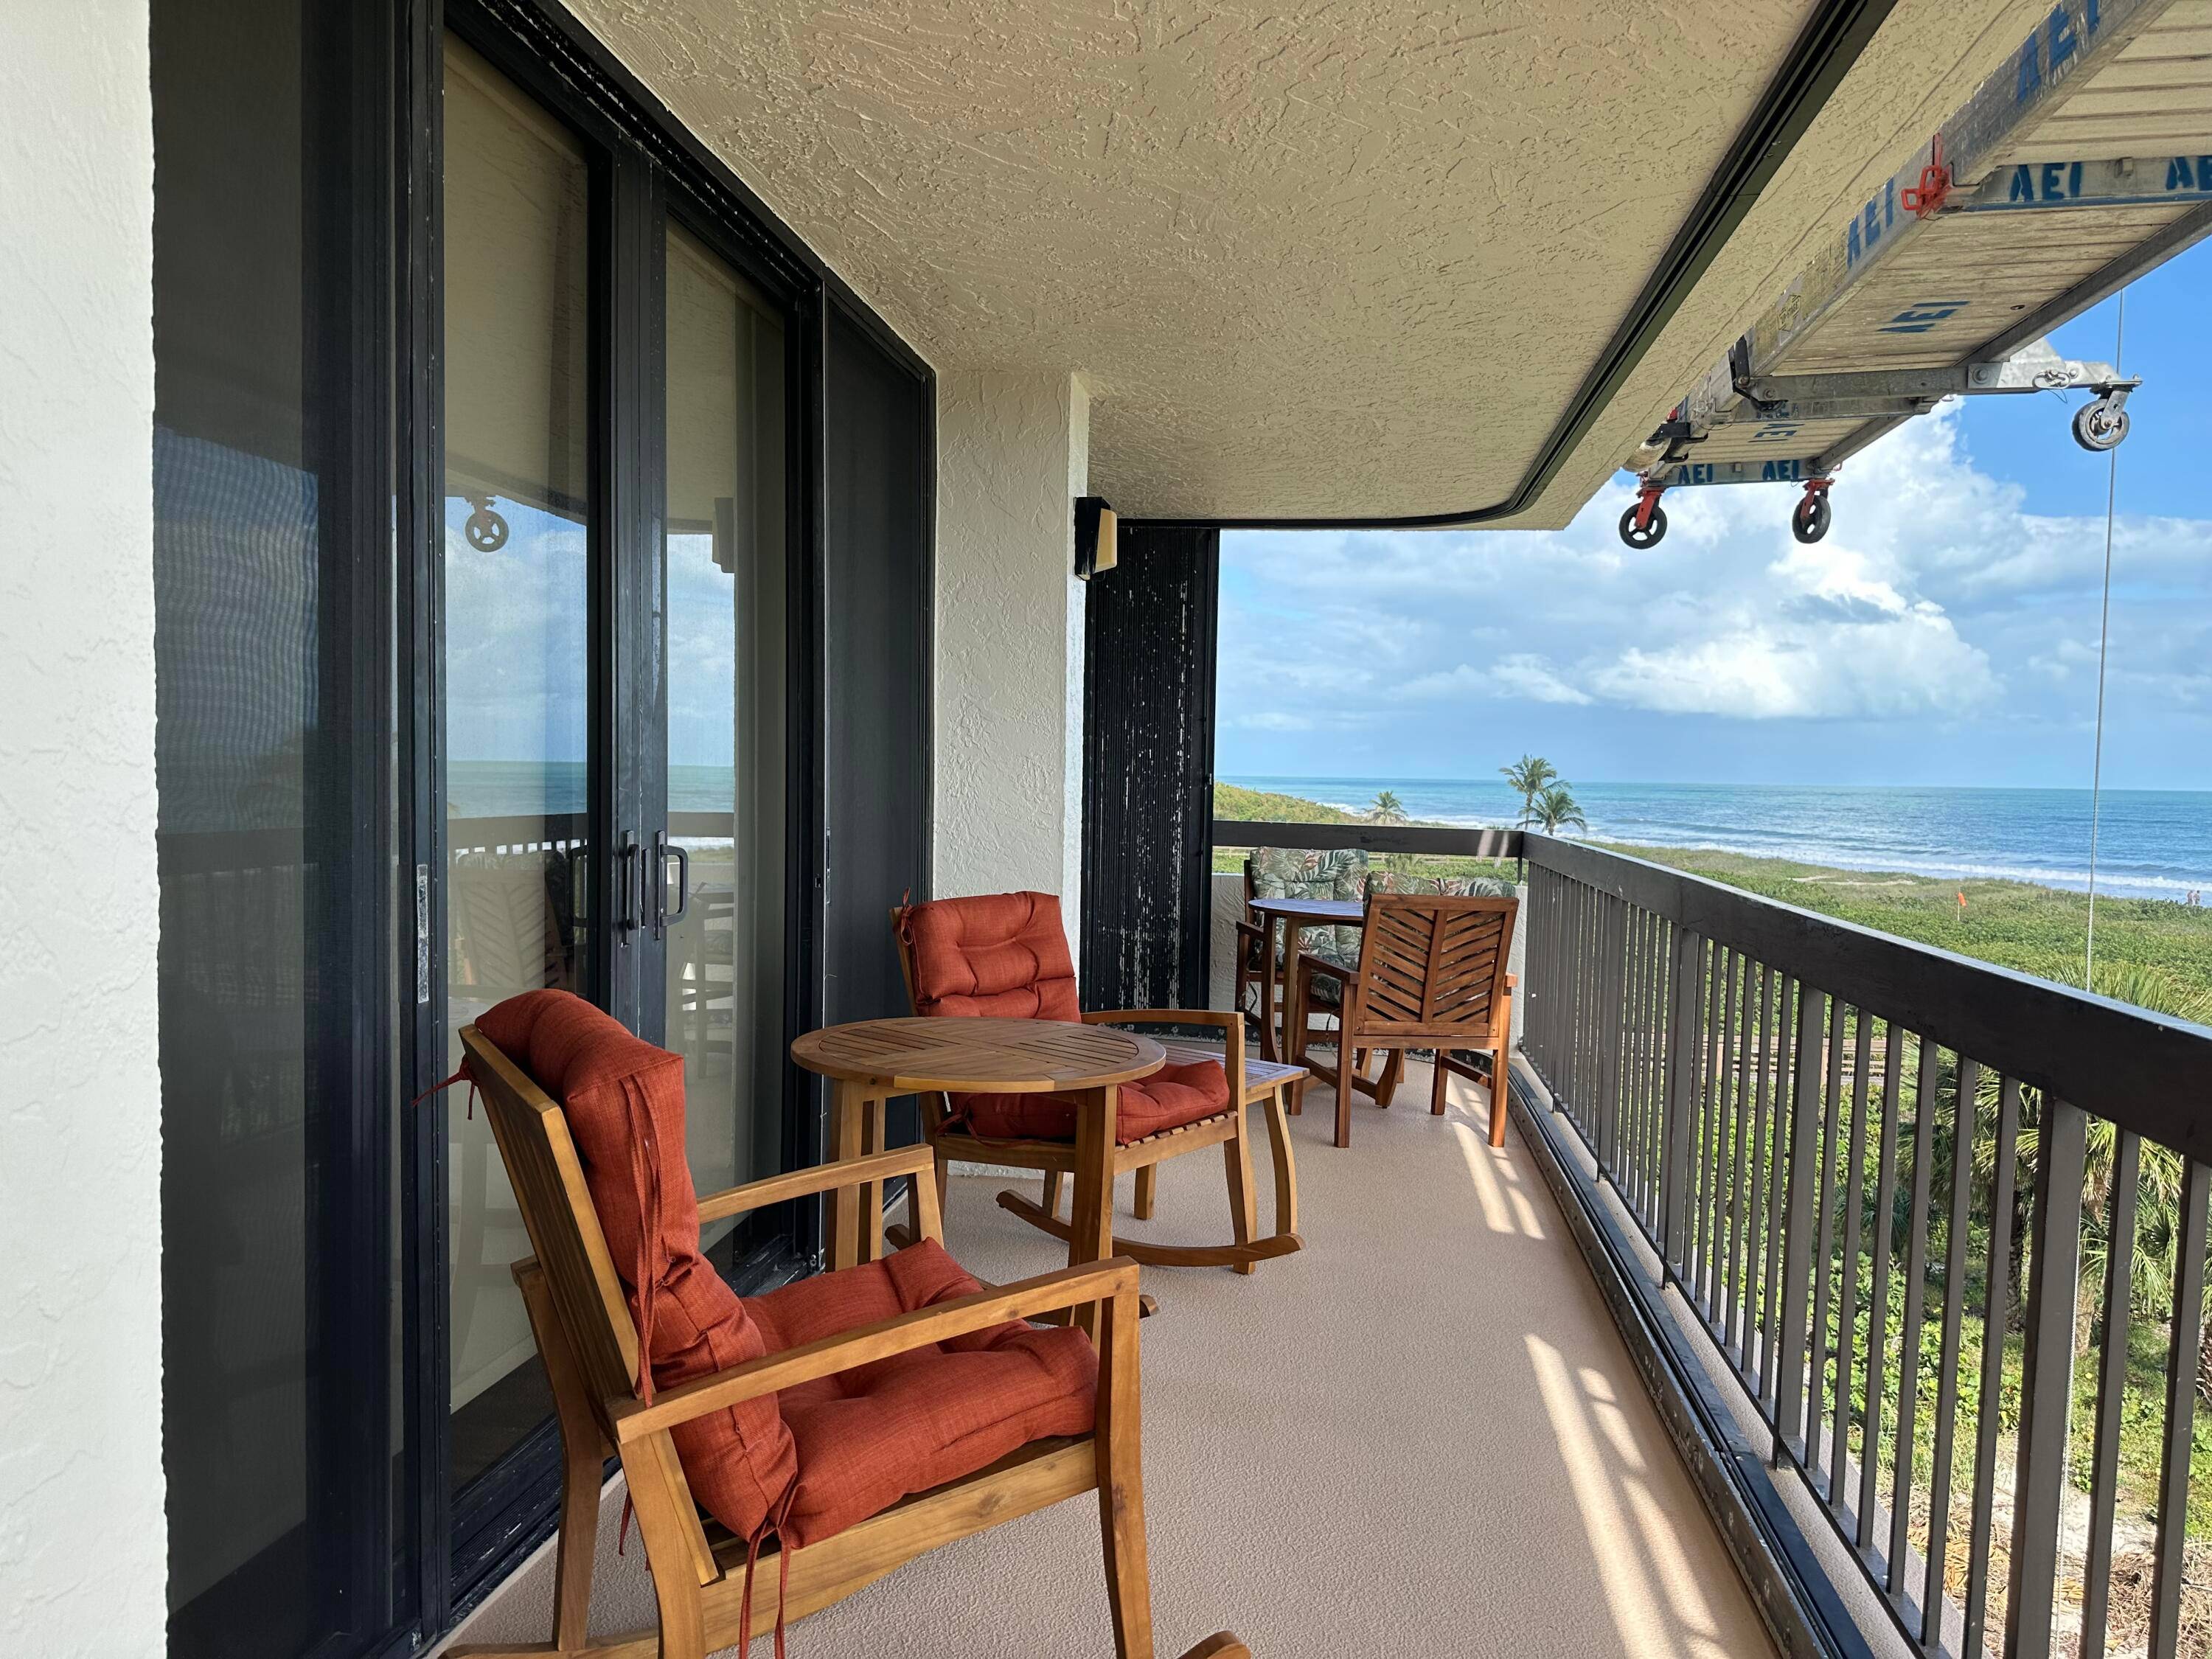 Enjoy breathtaking ocean views from every room in this stunningly renovated and thoughtfully furnished 5th floor condo in Hutchinson Island.